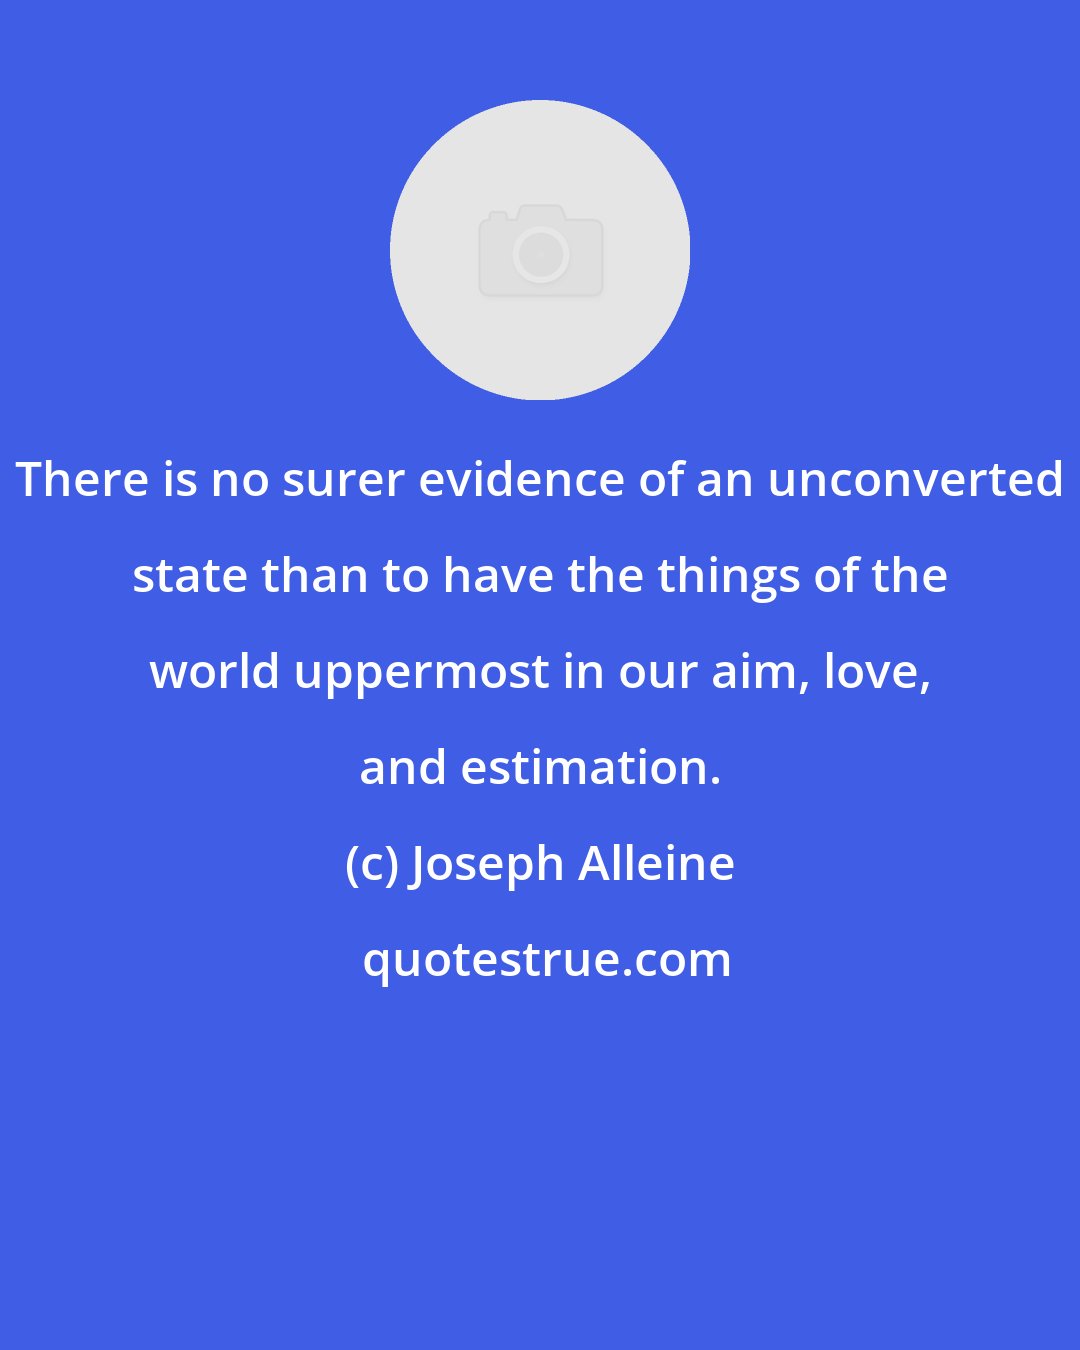 Joseph Alleine: There is no surer evidence of an unconverted state than to have the things of the world uppermost in our aim, love, and estimation.